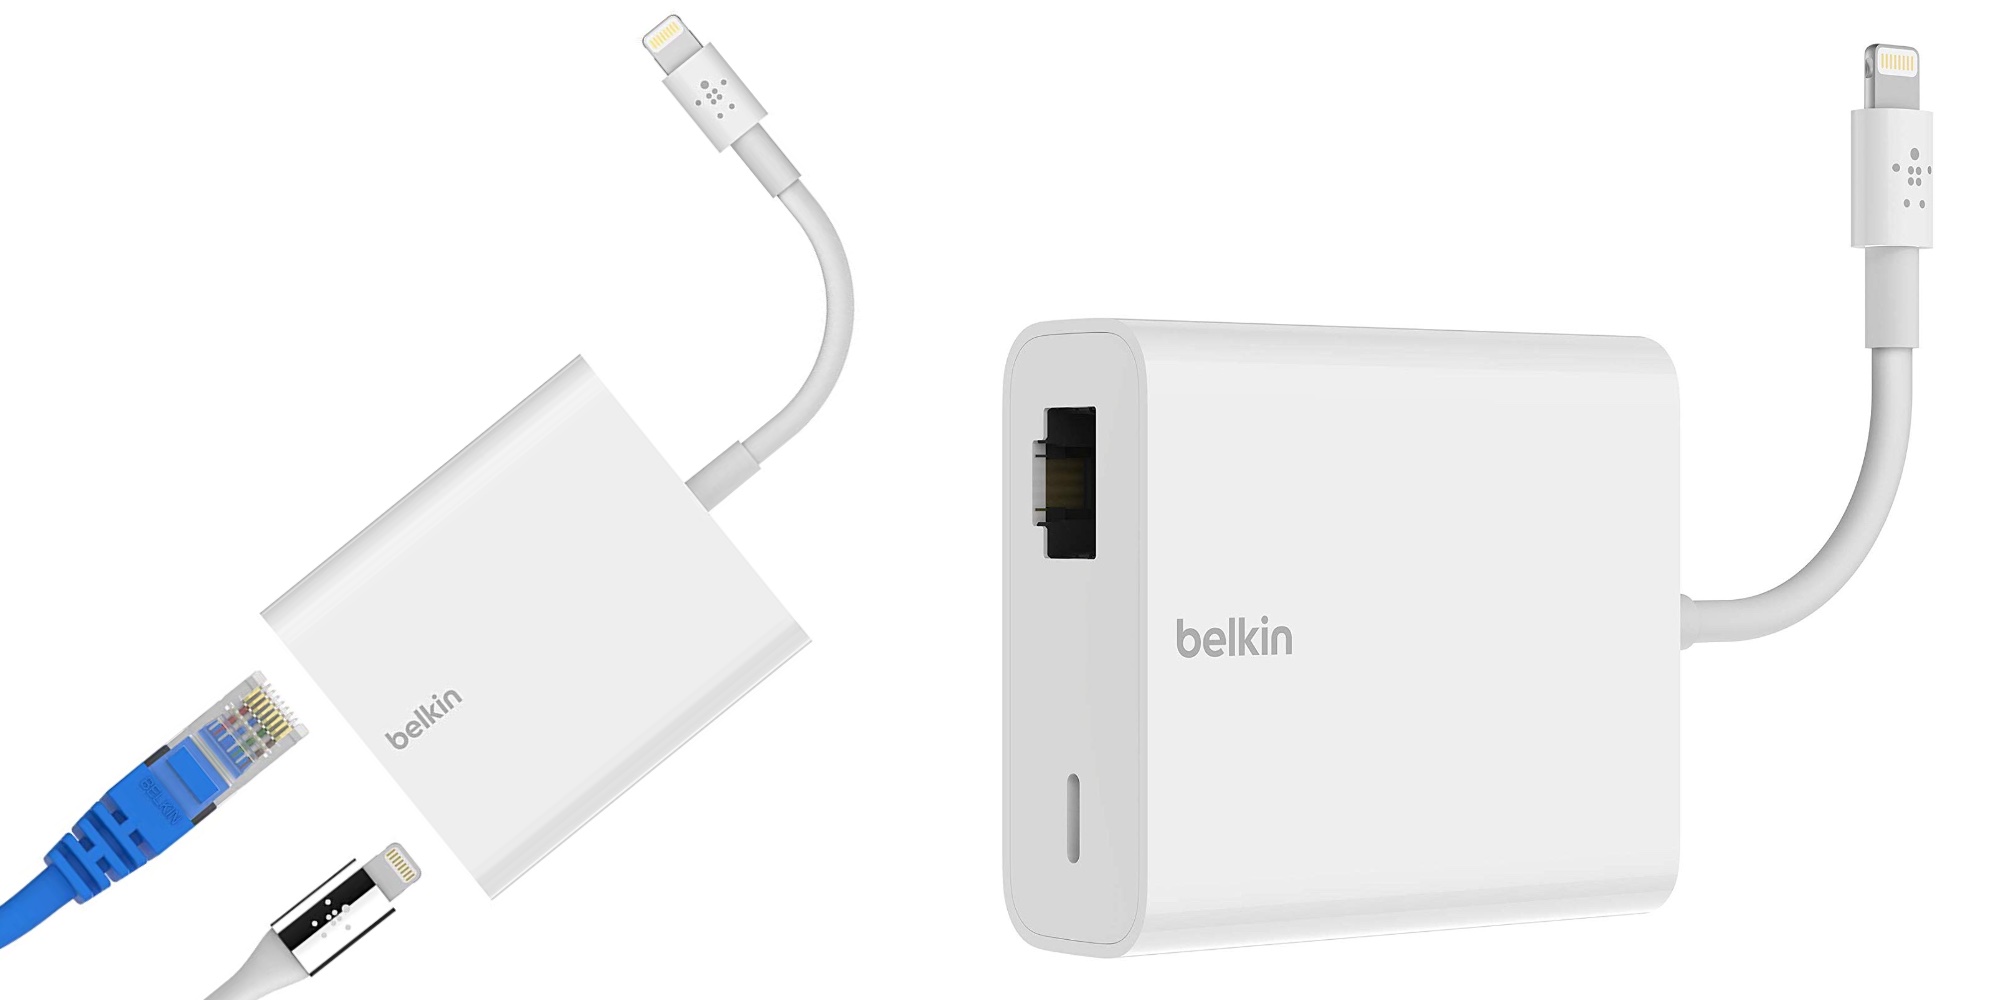 Belkin's Ethernet + Power Adapter for iPad gets nearly 30 